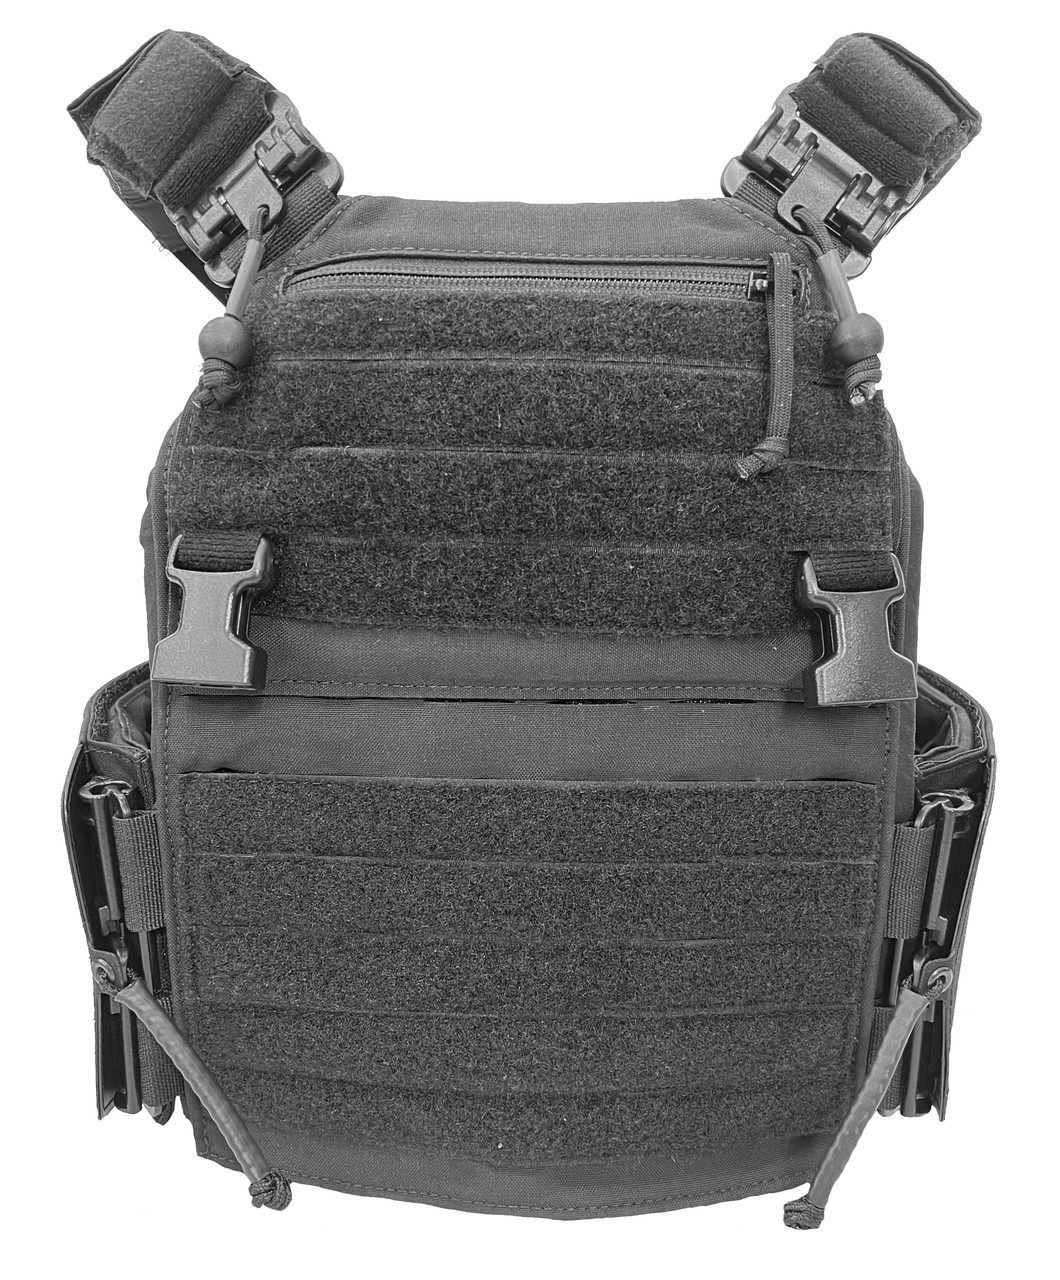 PLATE CARRIERS